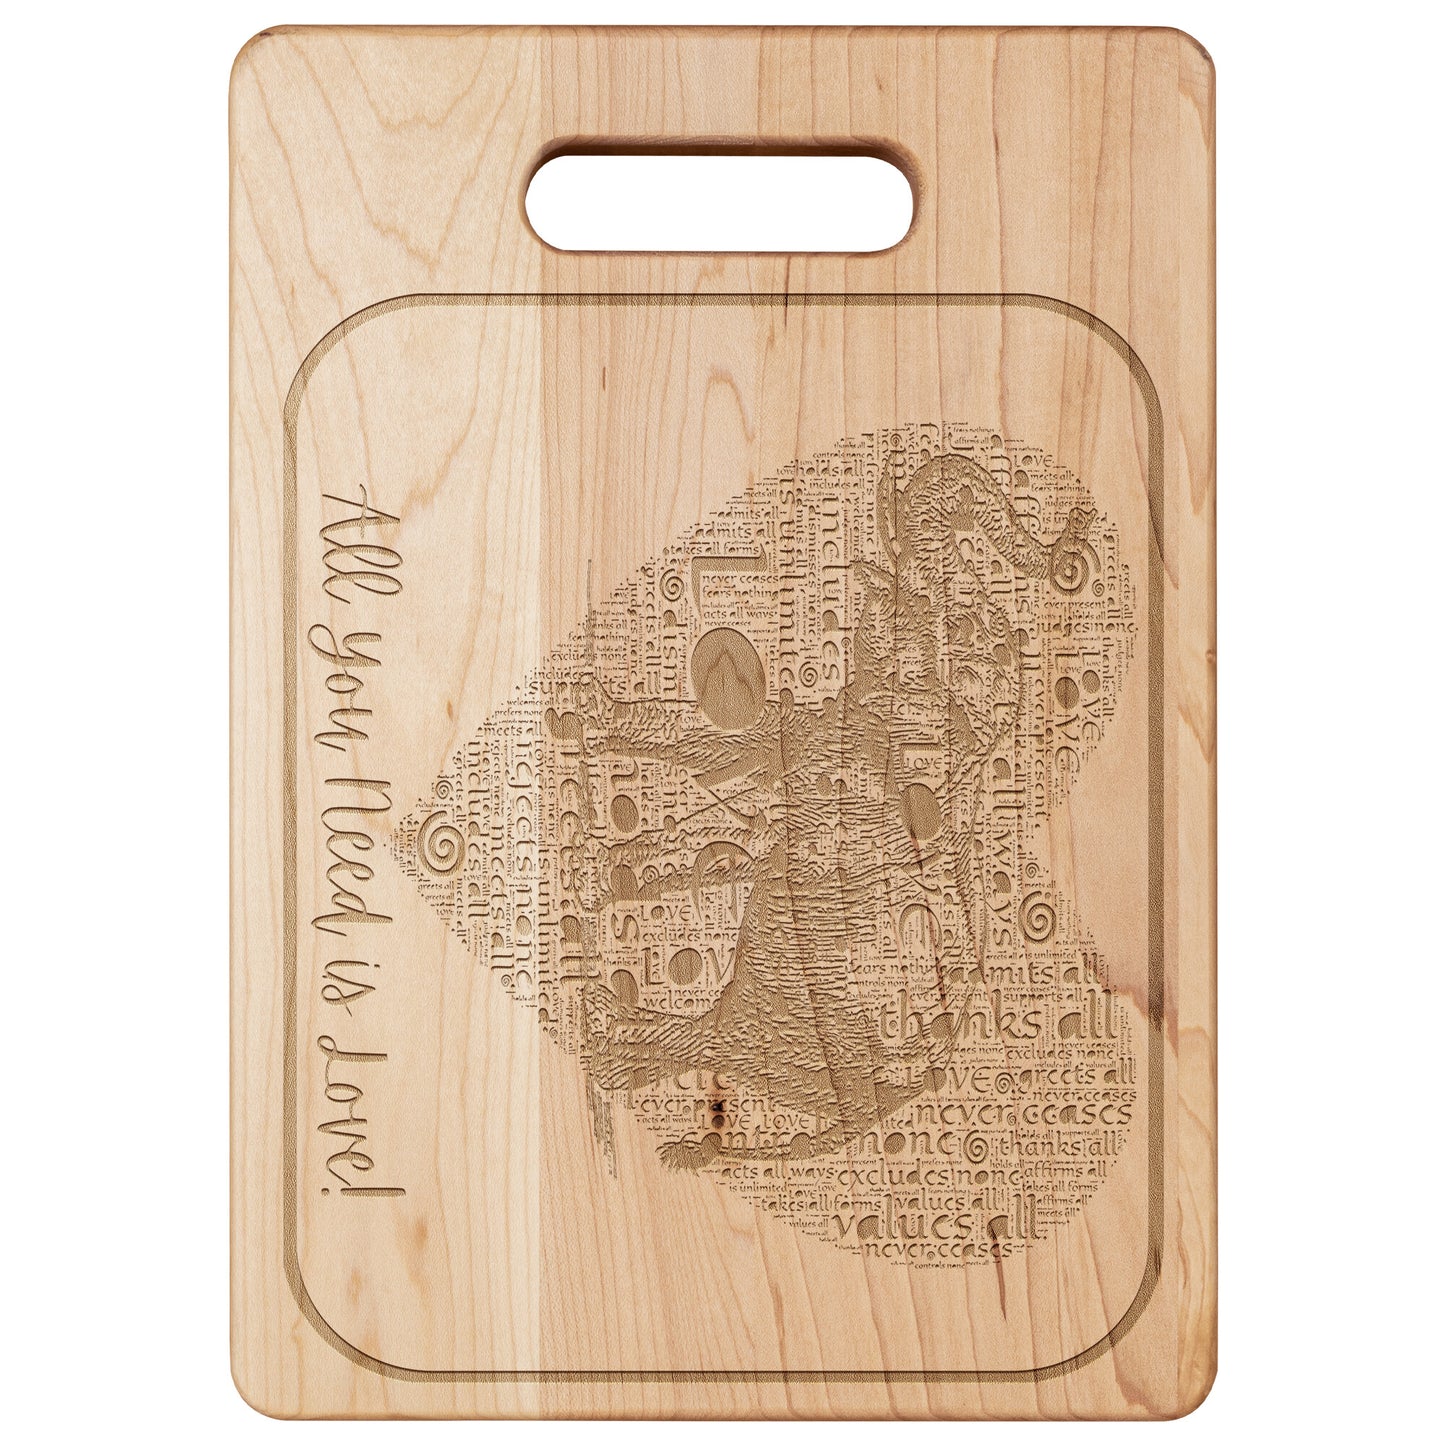 All You Need is Love Maple Elephant Cutting Board, Cheese Board kitchen décor, Housewarming Gift